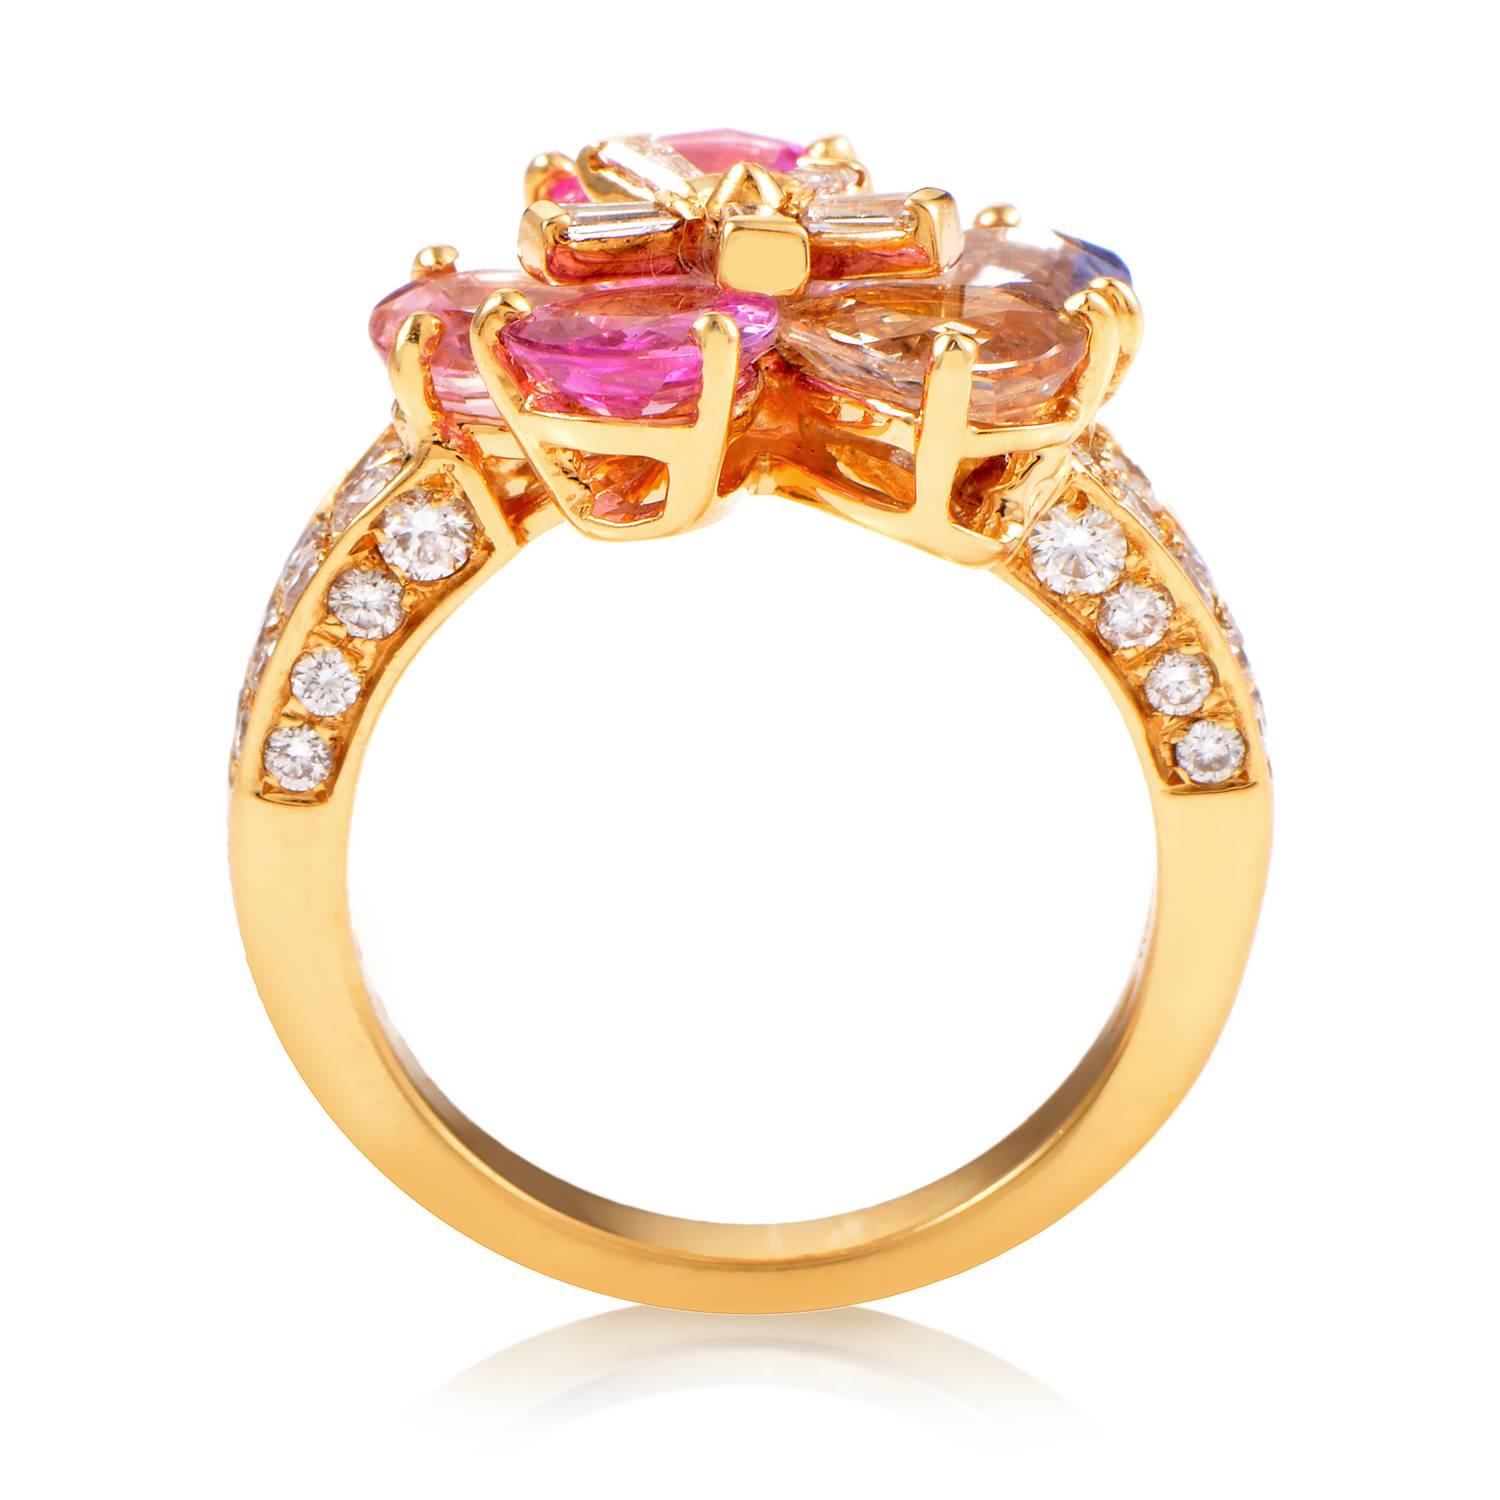 Brimming with life, light and color, this superb Bvlgari ring is a stunning tribute to art and fine jewelry. The ring is comprised of 18K yellow gold with a tapered shank paved in diamonds that add radiance to the already splendid array of multi